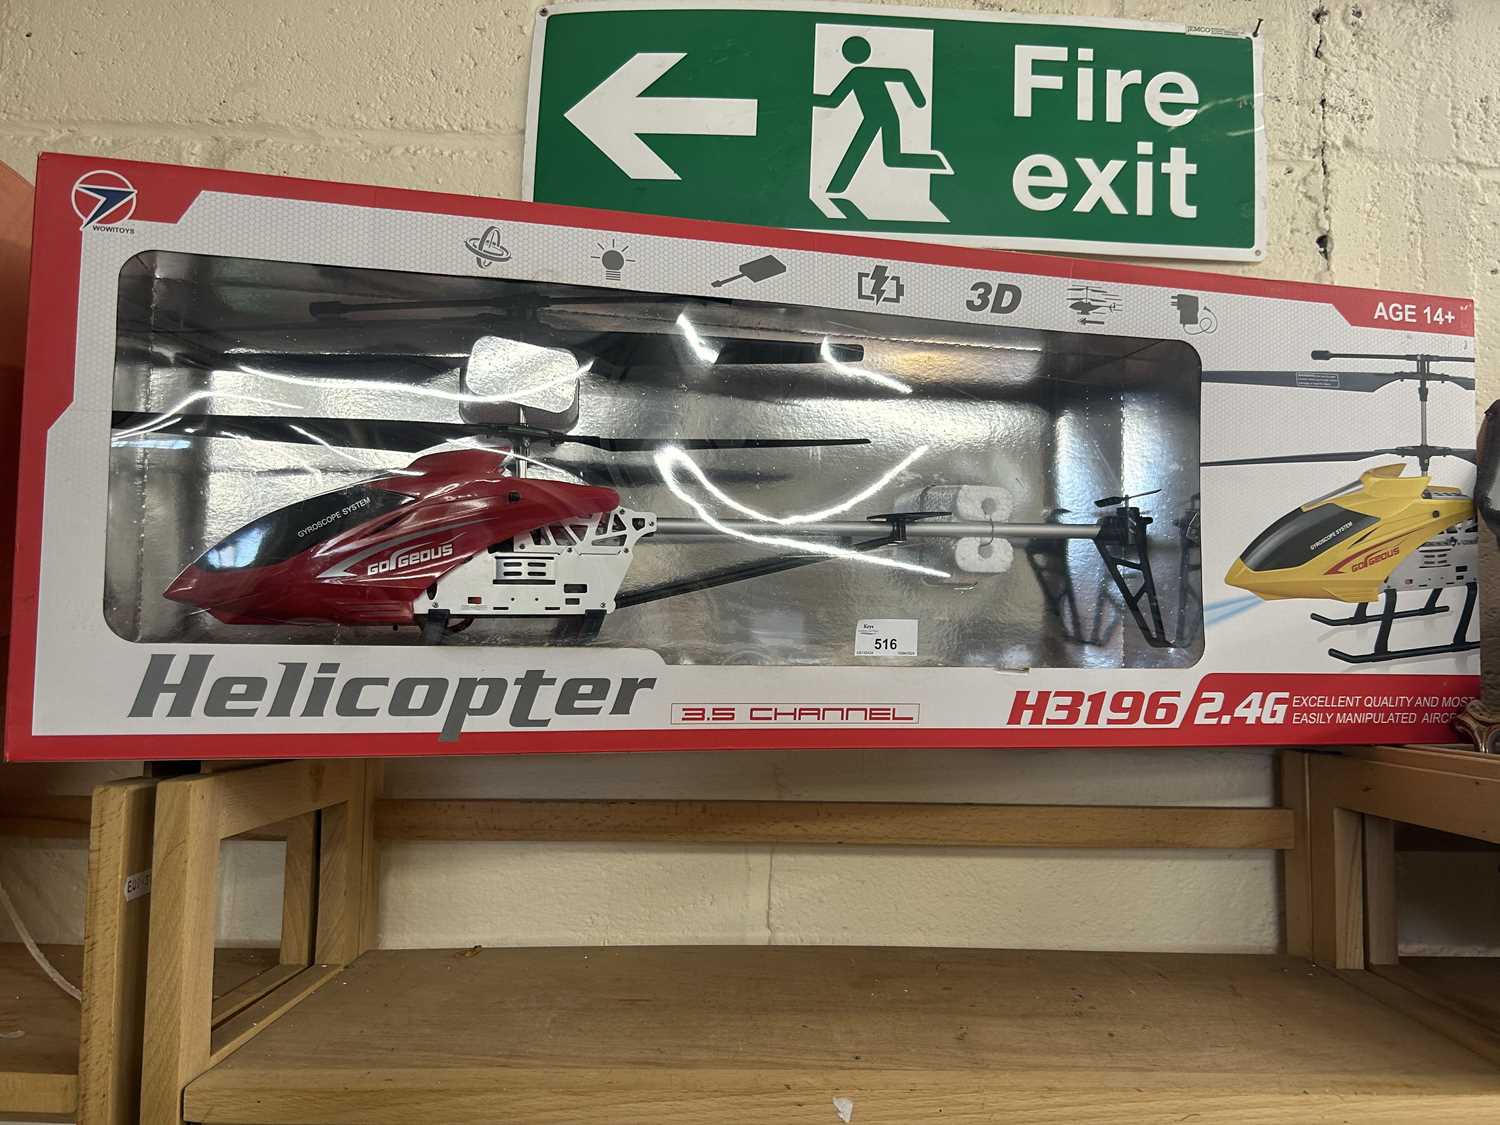 A remote control helicopter